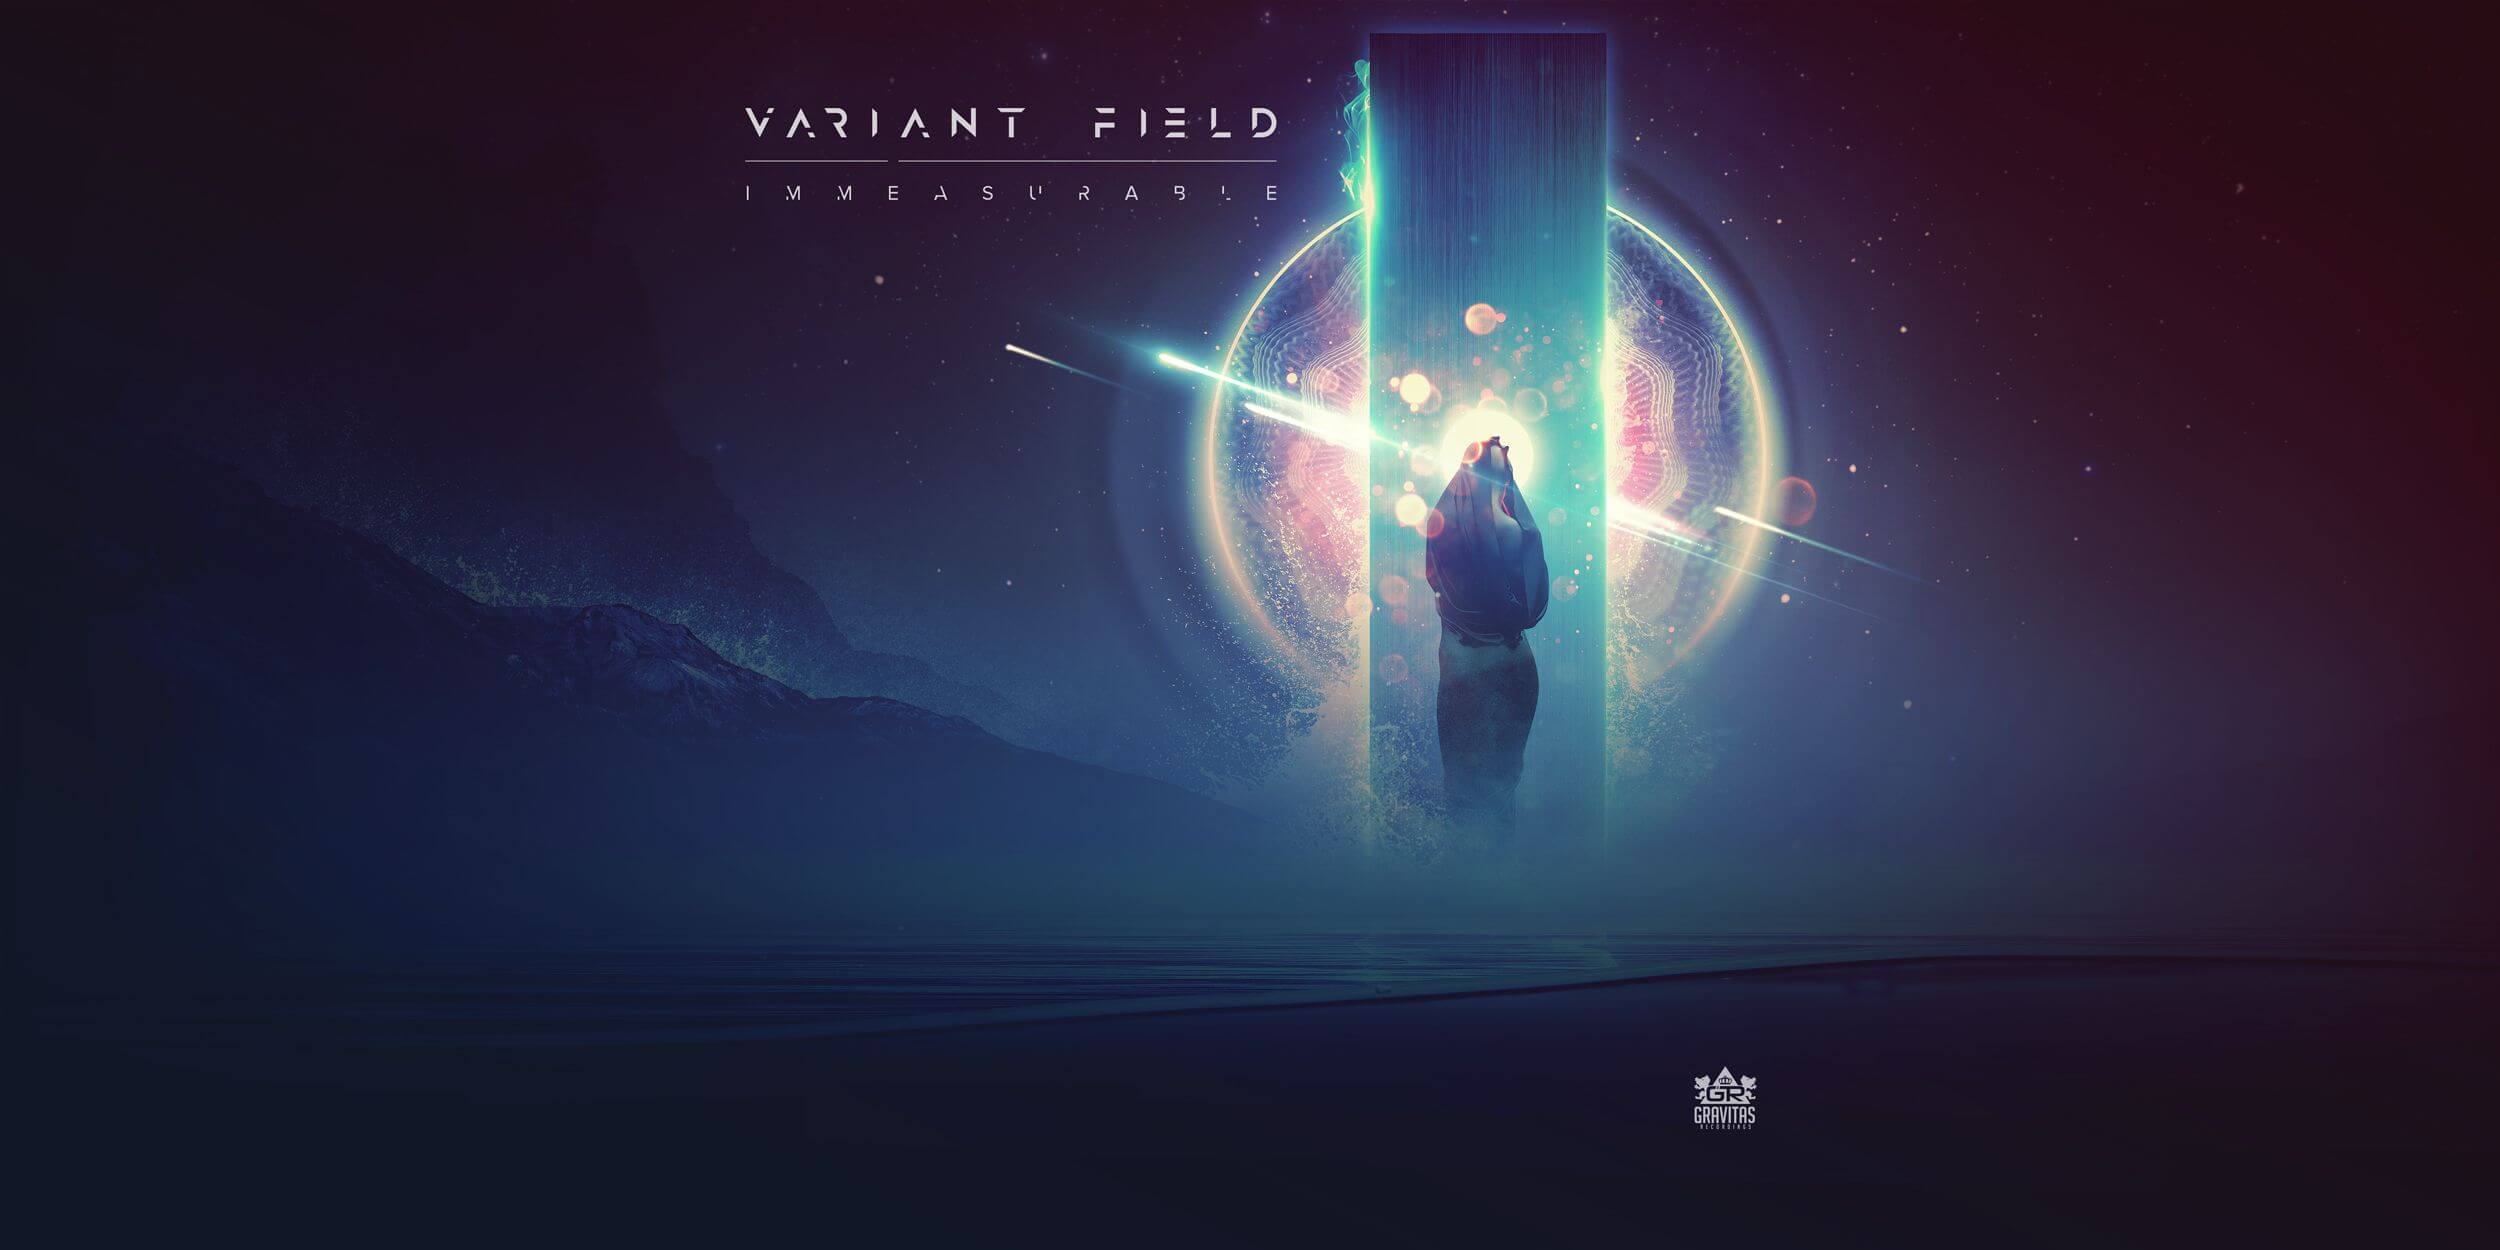 Variant Field Delivers Something ‘Immeasurable’